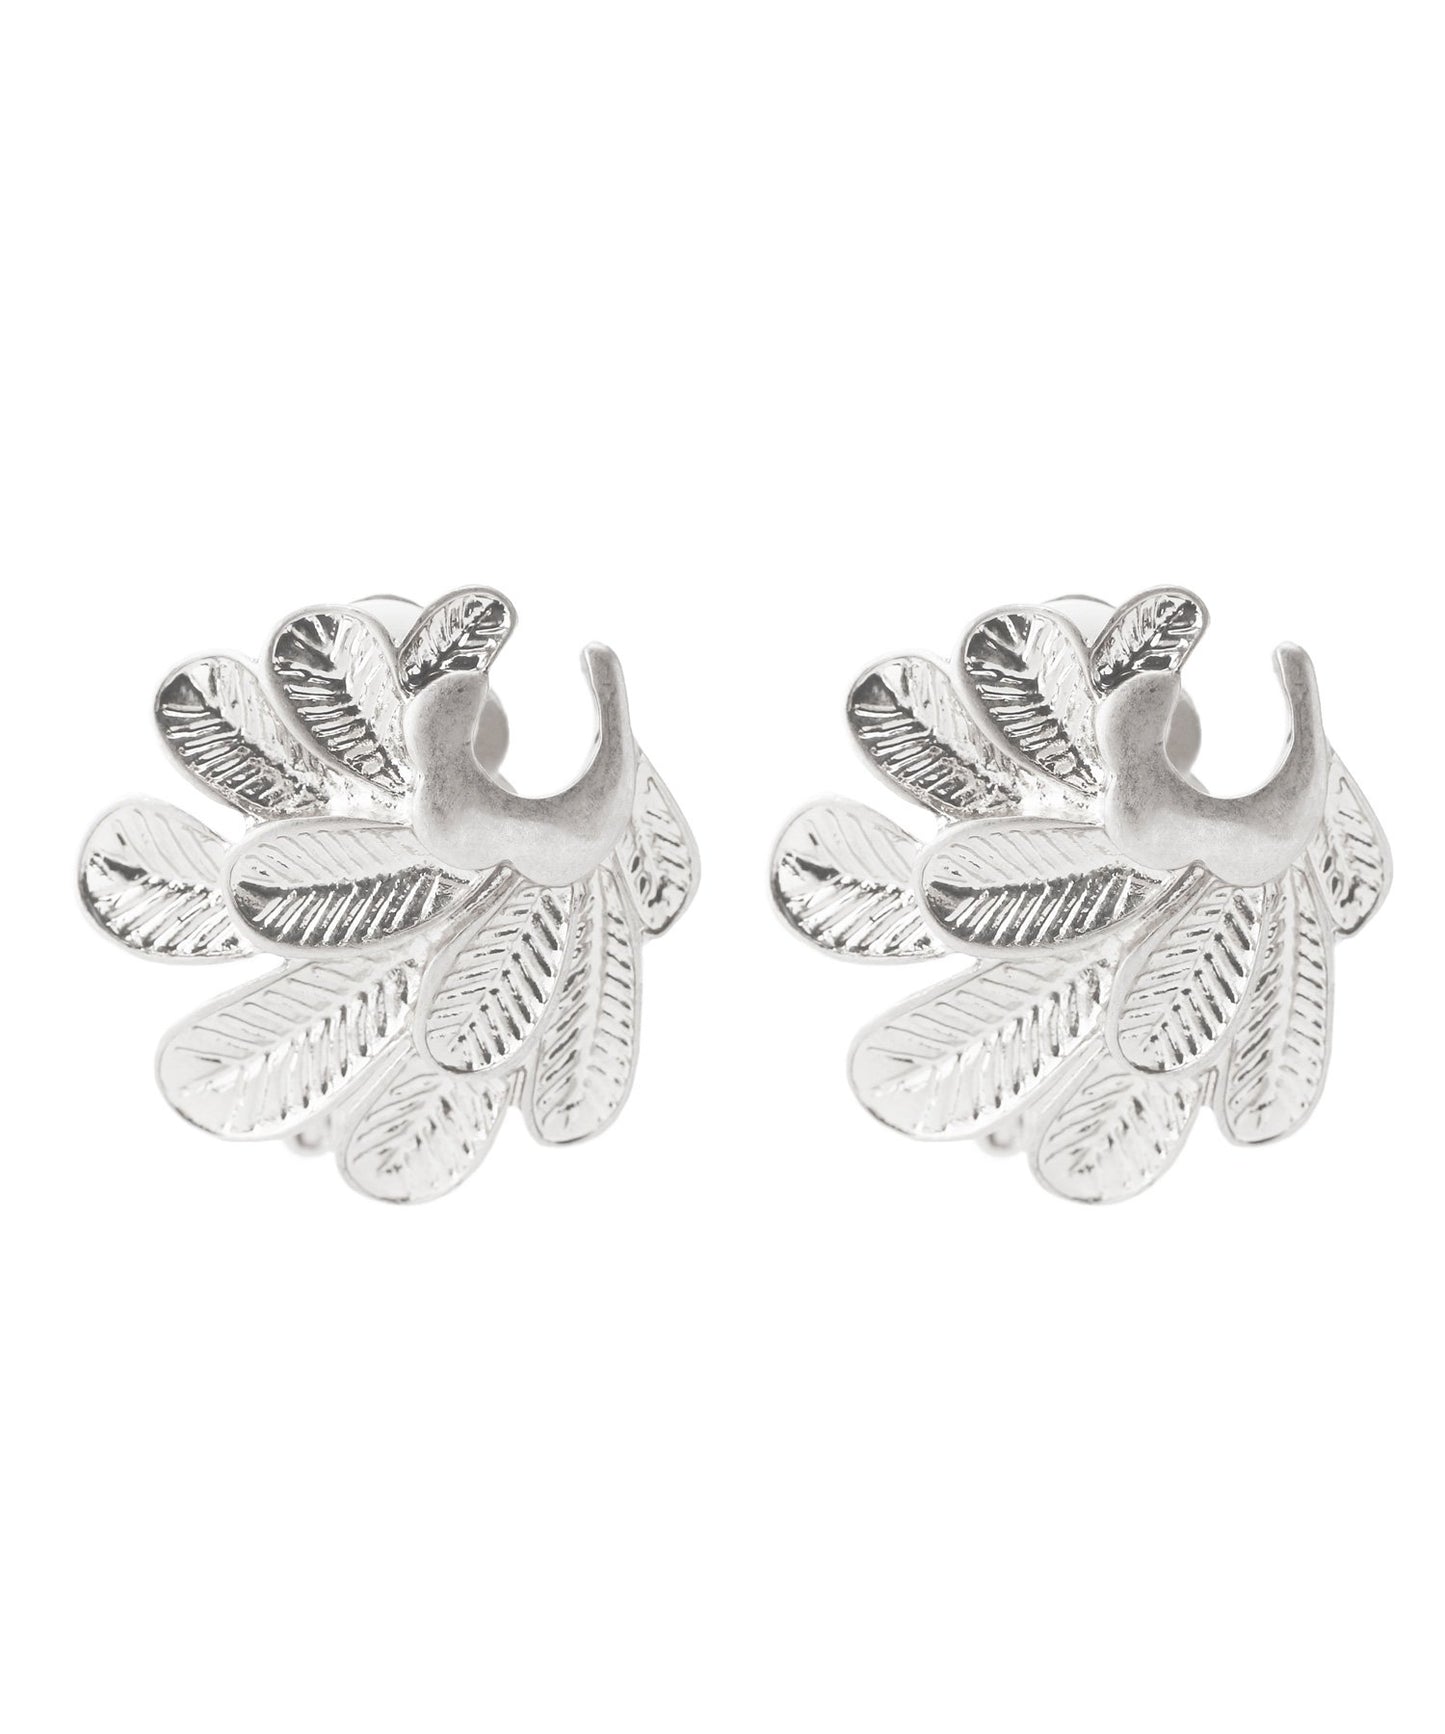 Metal Feather Clip On Earrings[Ownideal]